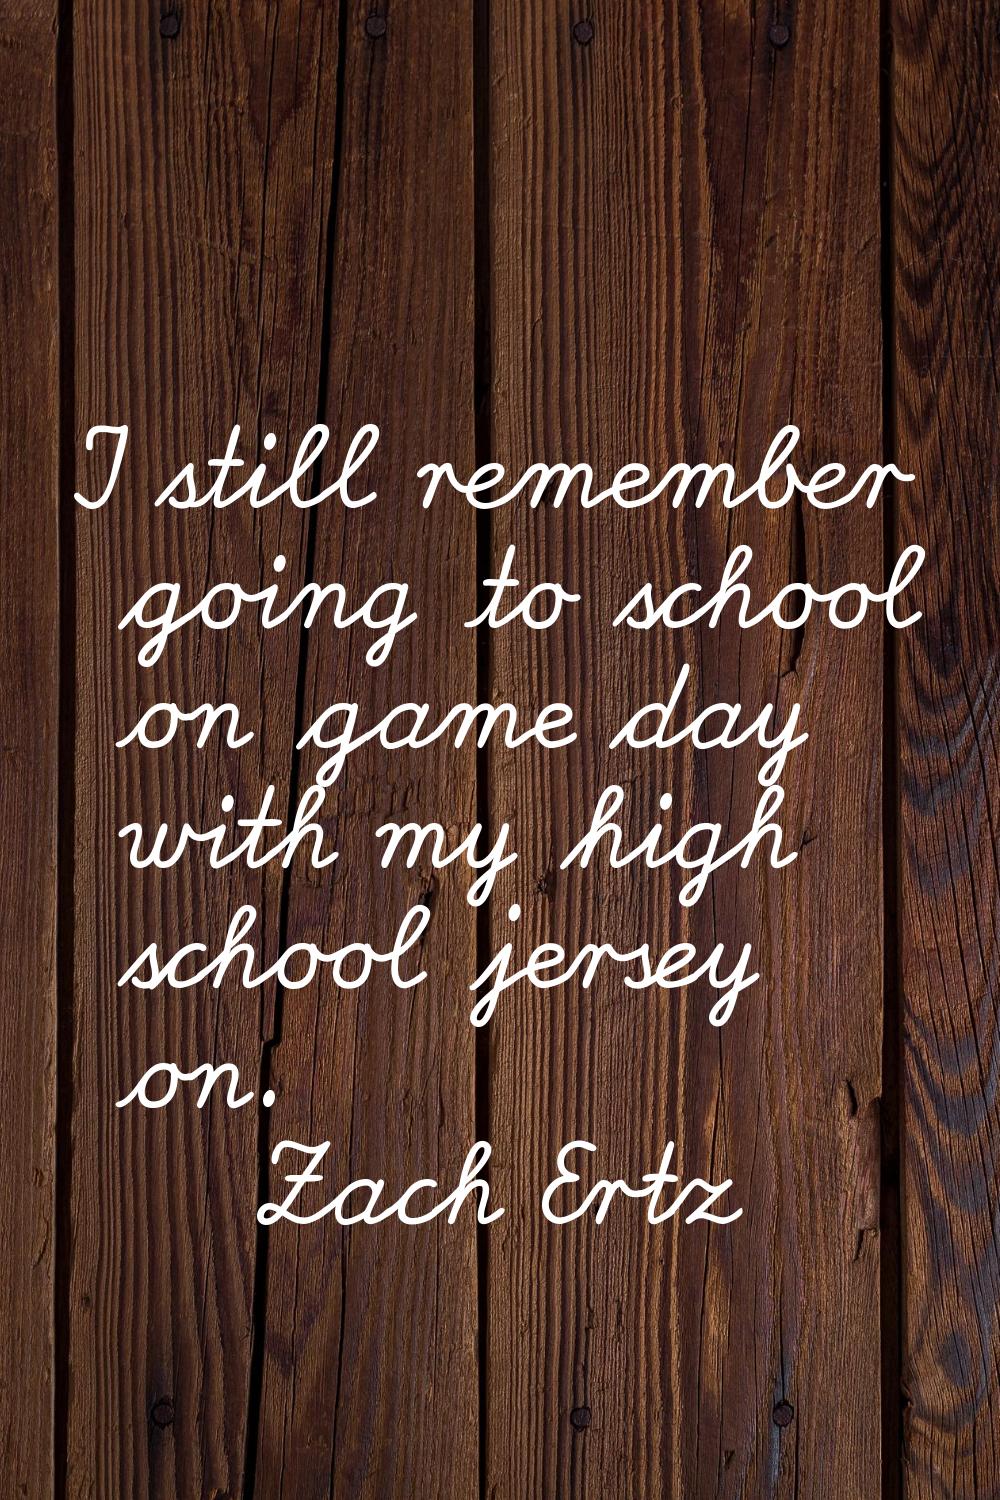 I still remember going to school on game day with my high school jersey on.